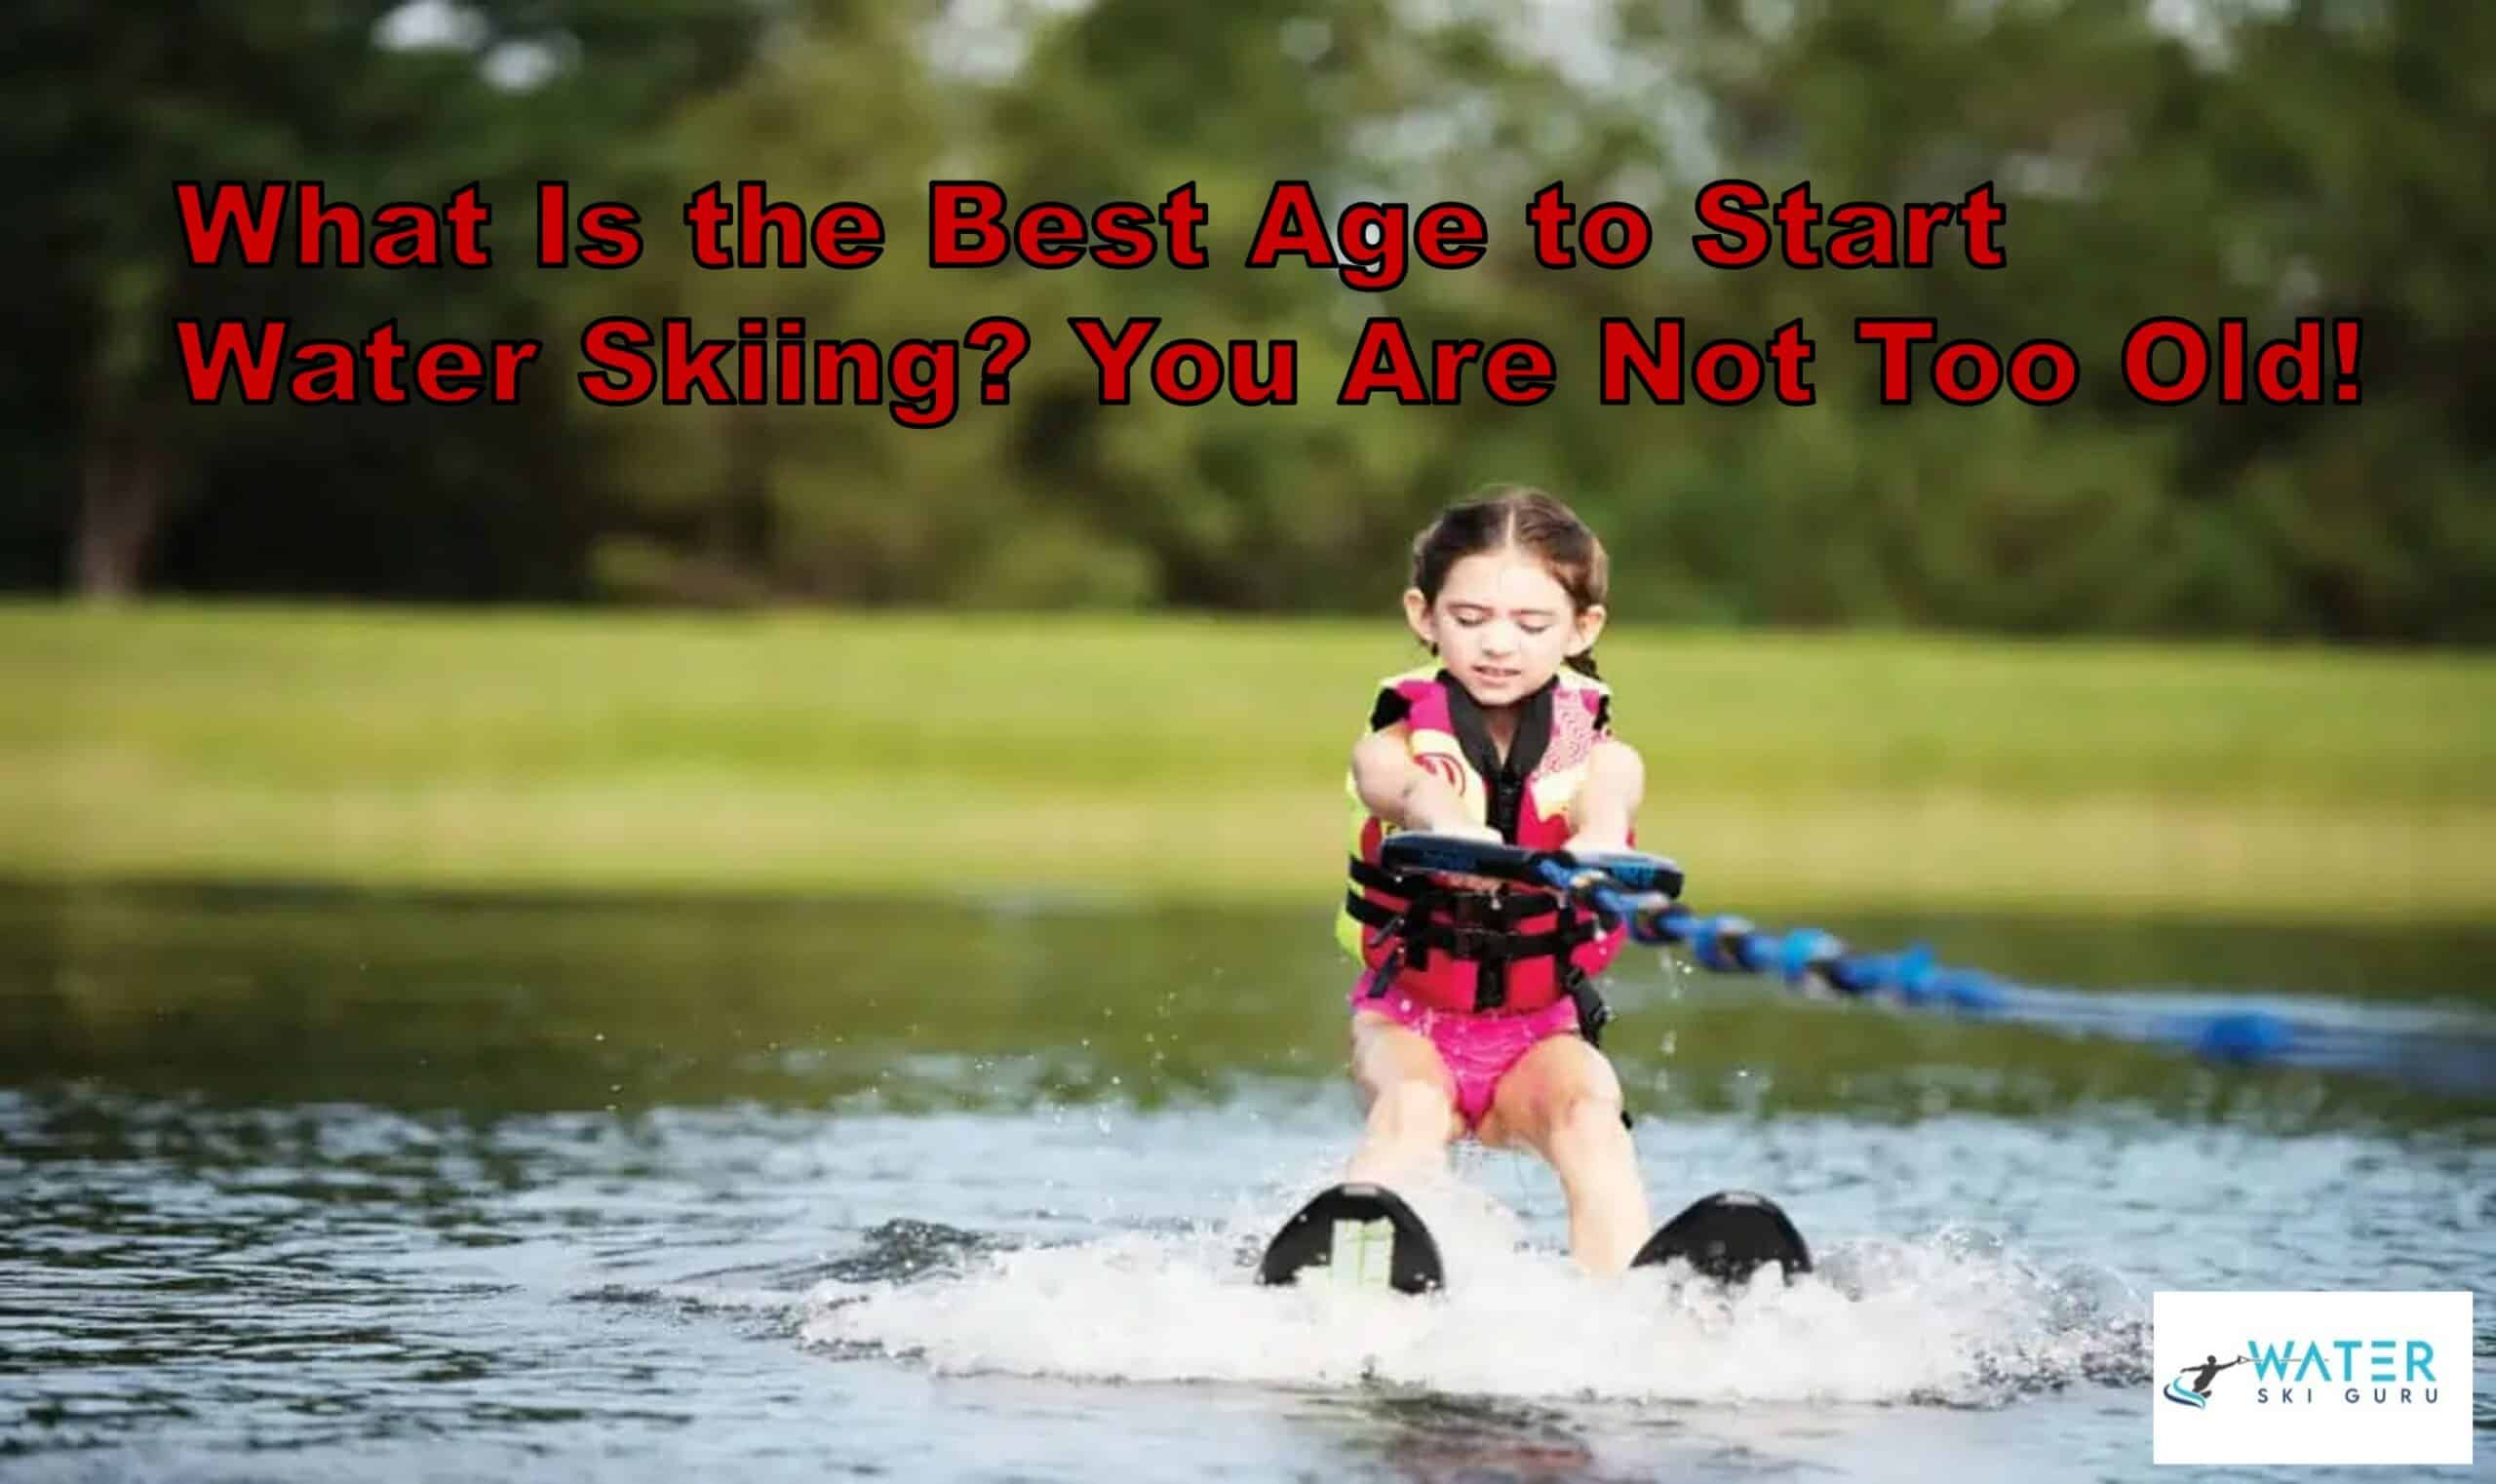 What Is the Best Age to Start Water Skiing You Are Not Too Old